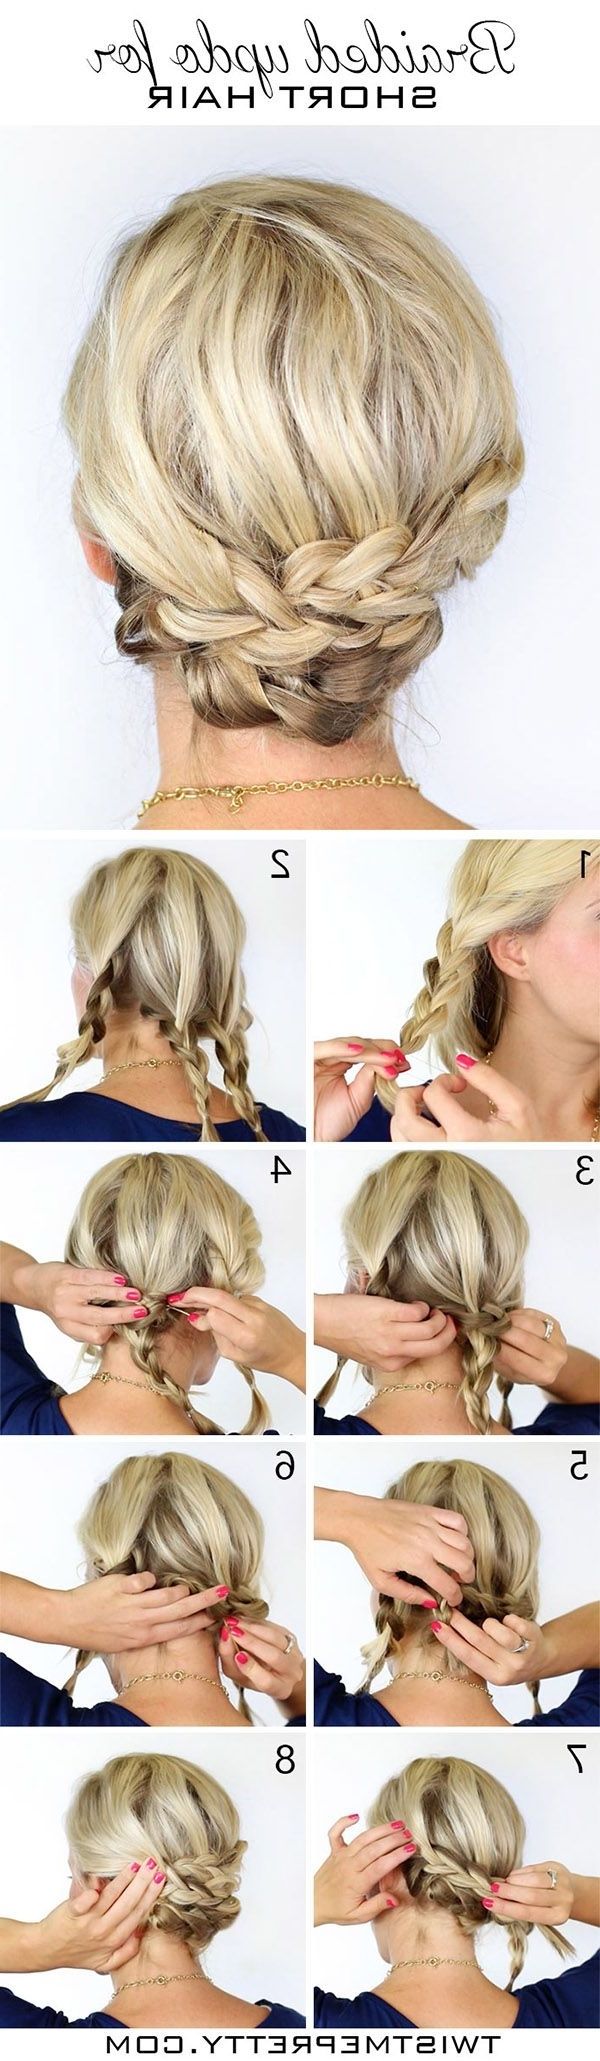 Popular Casual Wedding Hairstyles For Short Hair Throughout 75 Best Bridal Hair Images On Pinterest (View 12 of 15)